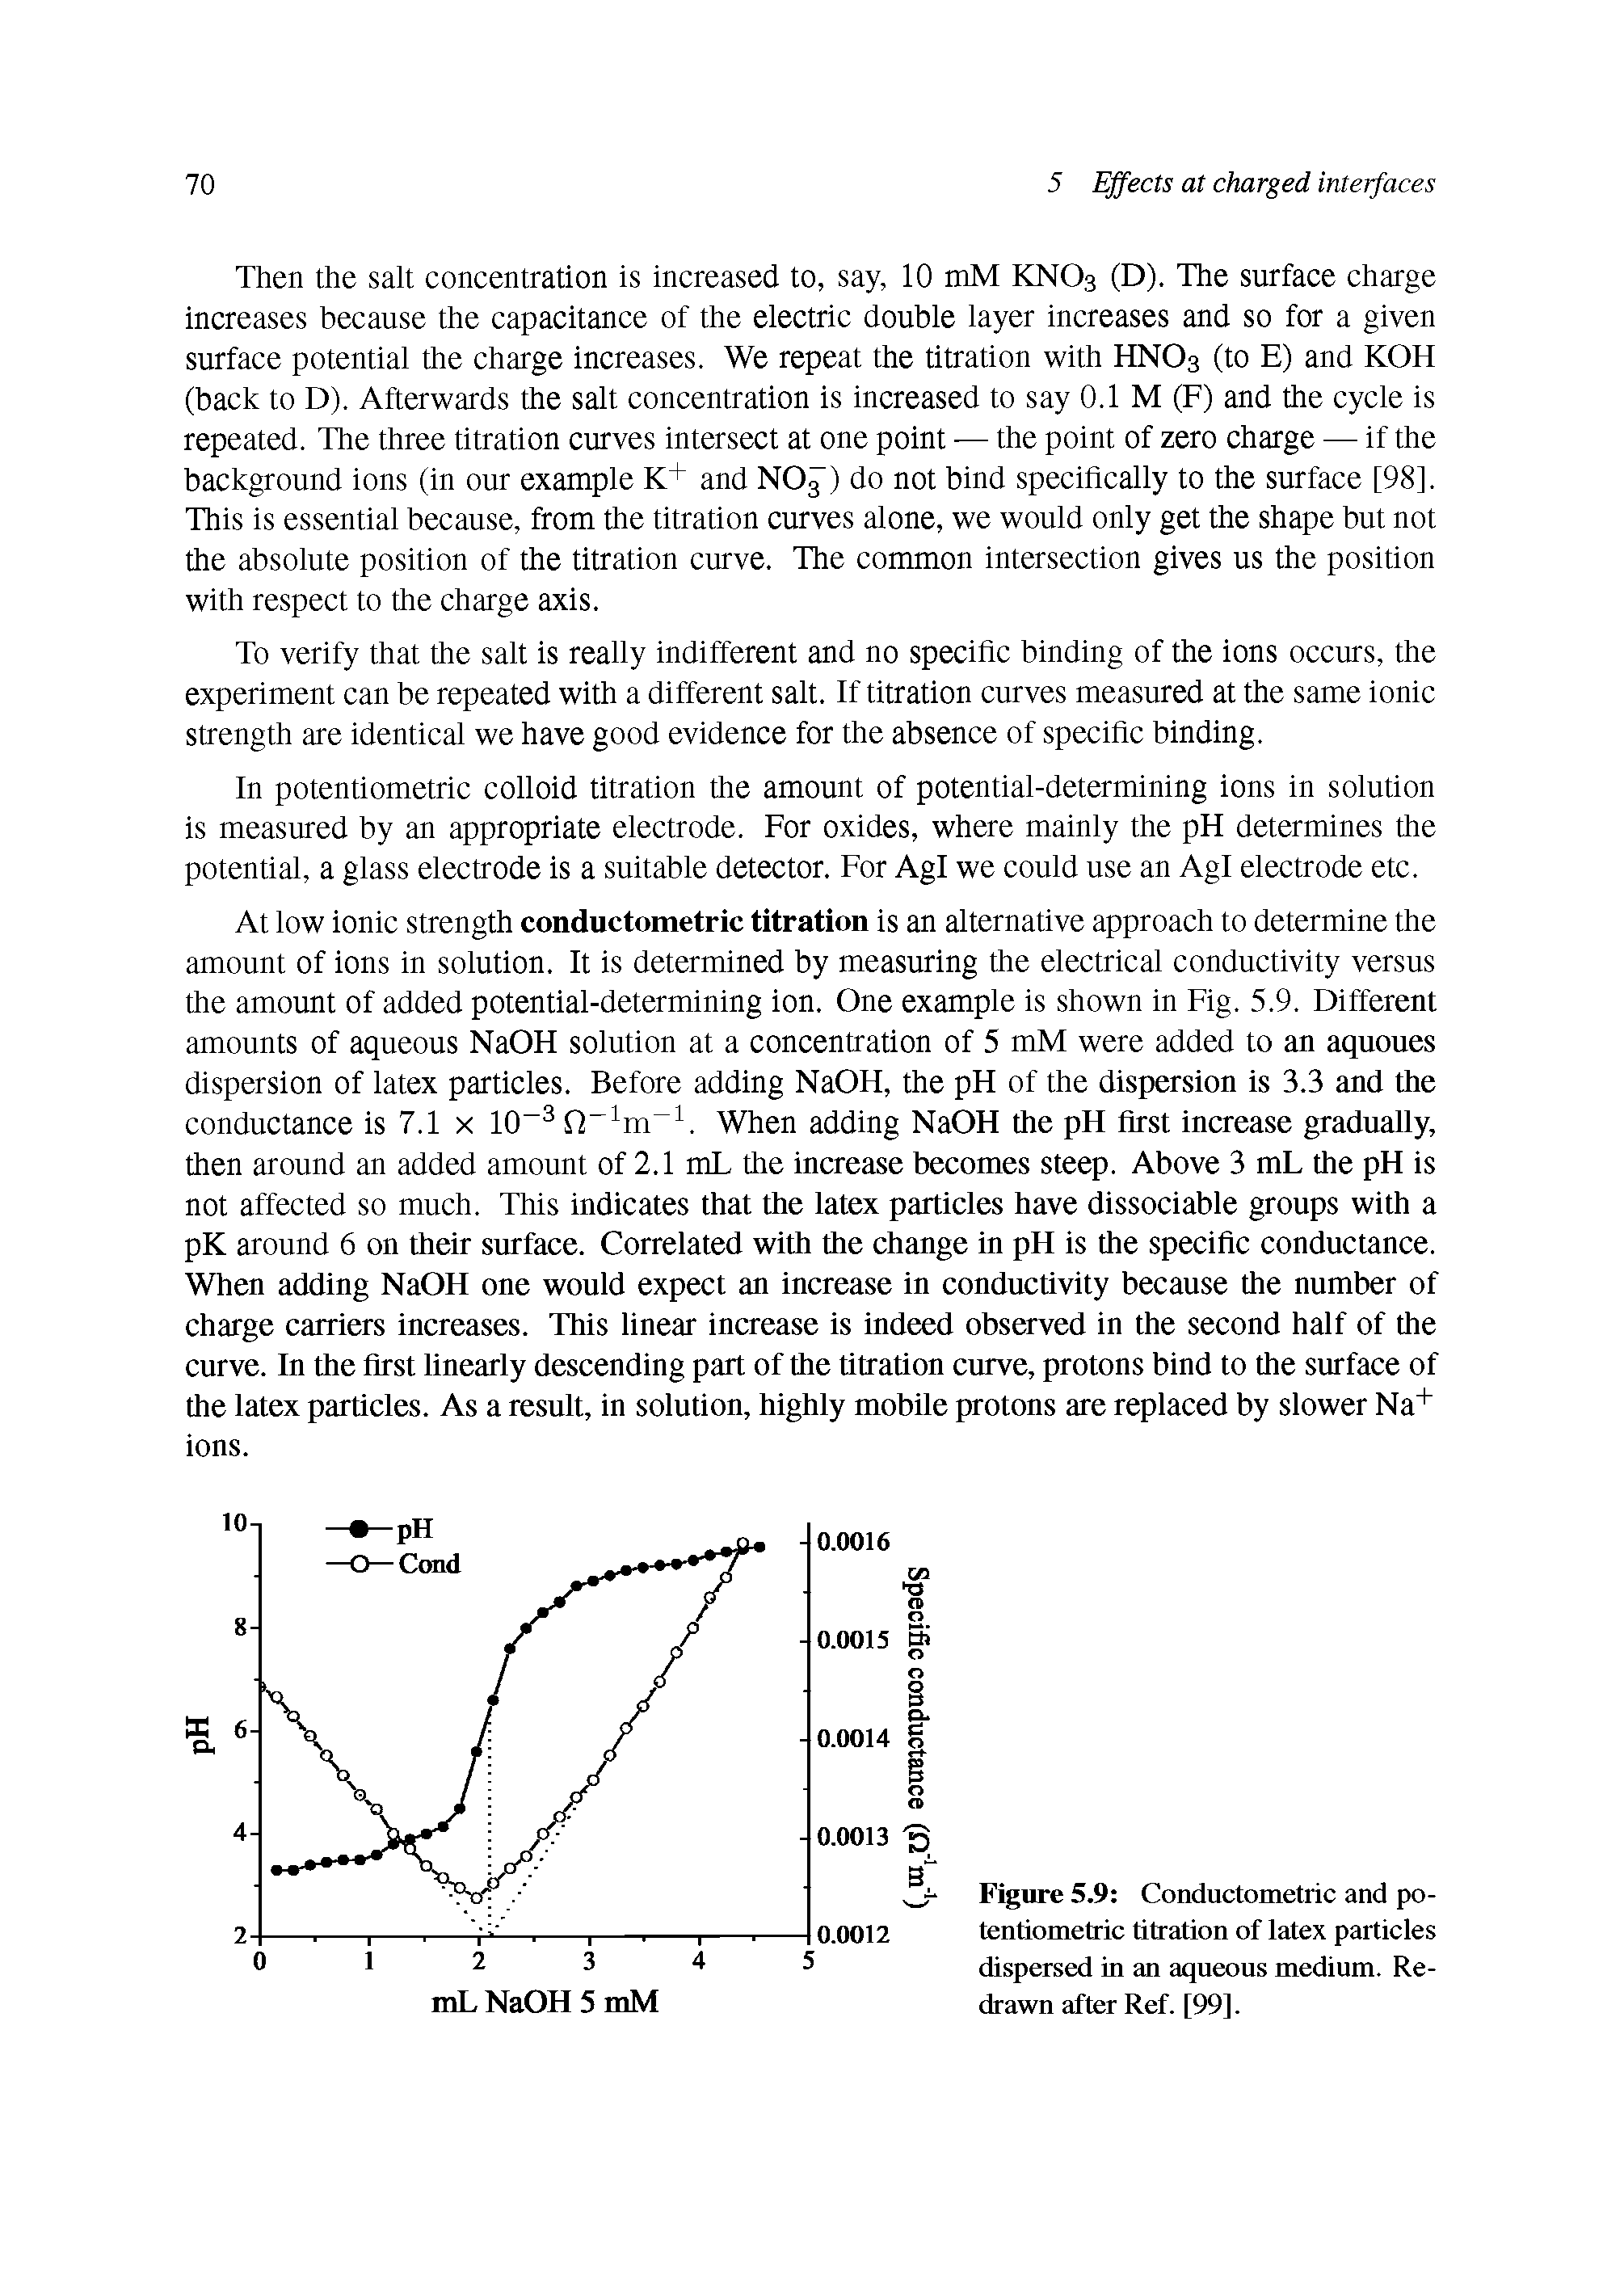 Figure 5.9 Conductometric and potentiometric titration of latex particles dispersed in an aqueous medium. Redrawn after Ref. [99].